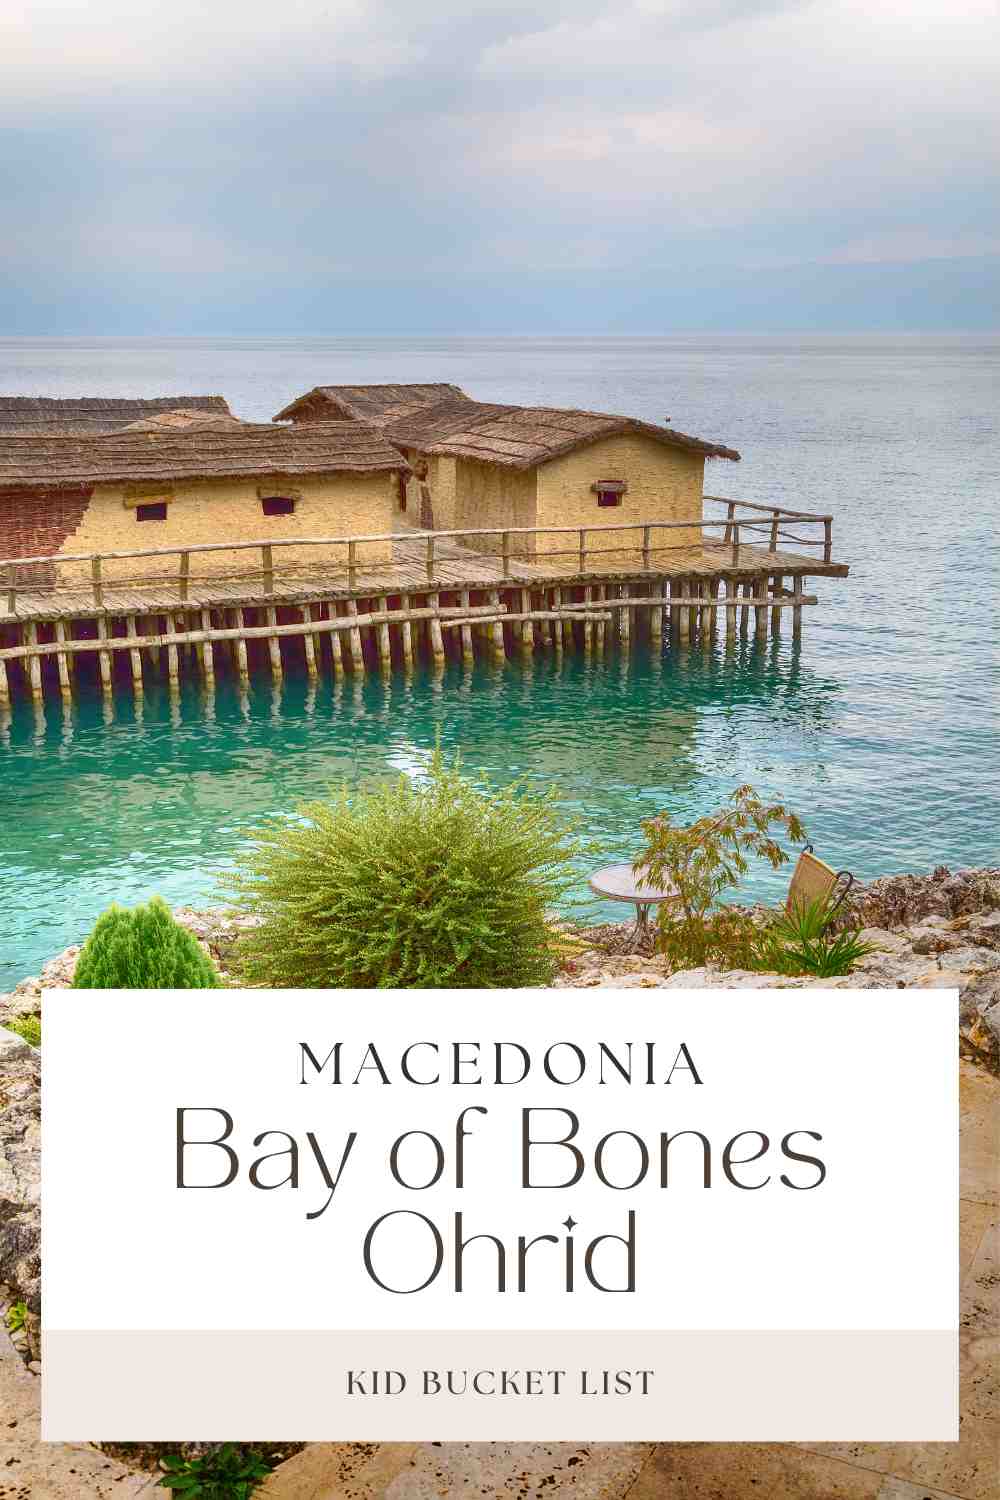 We visit the Bay of Bones in North Macedonia with kids